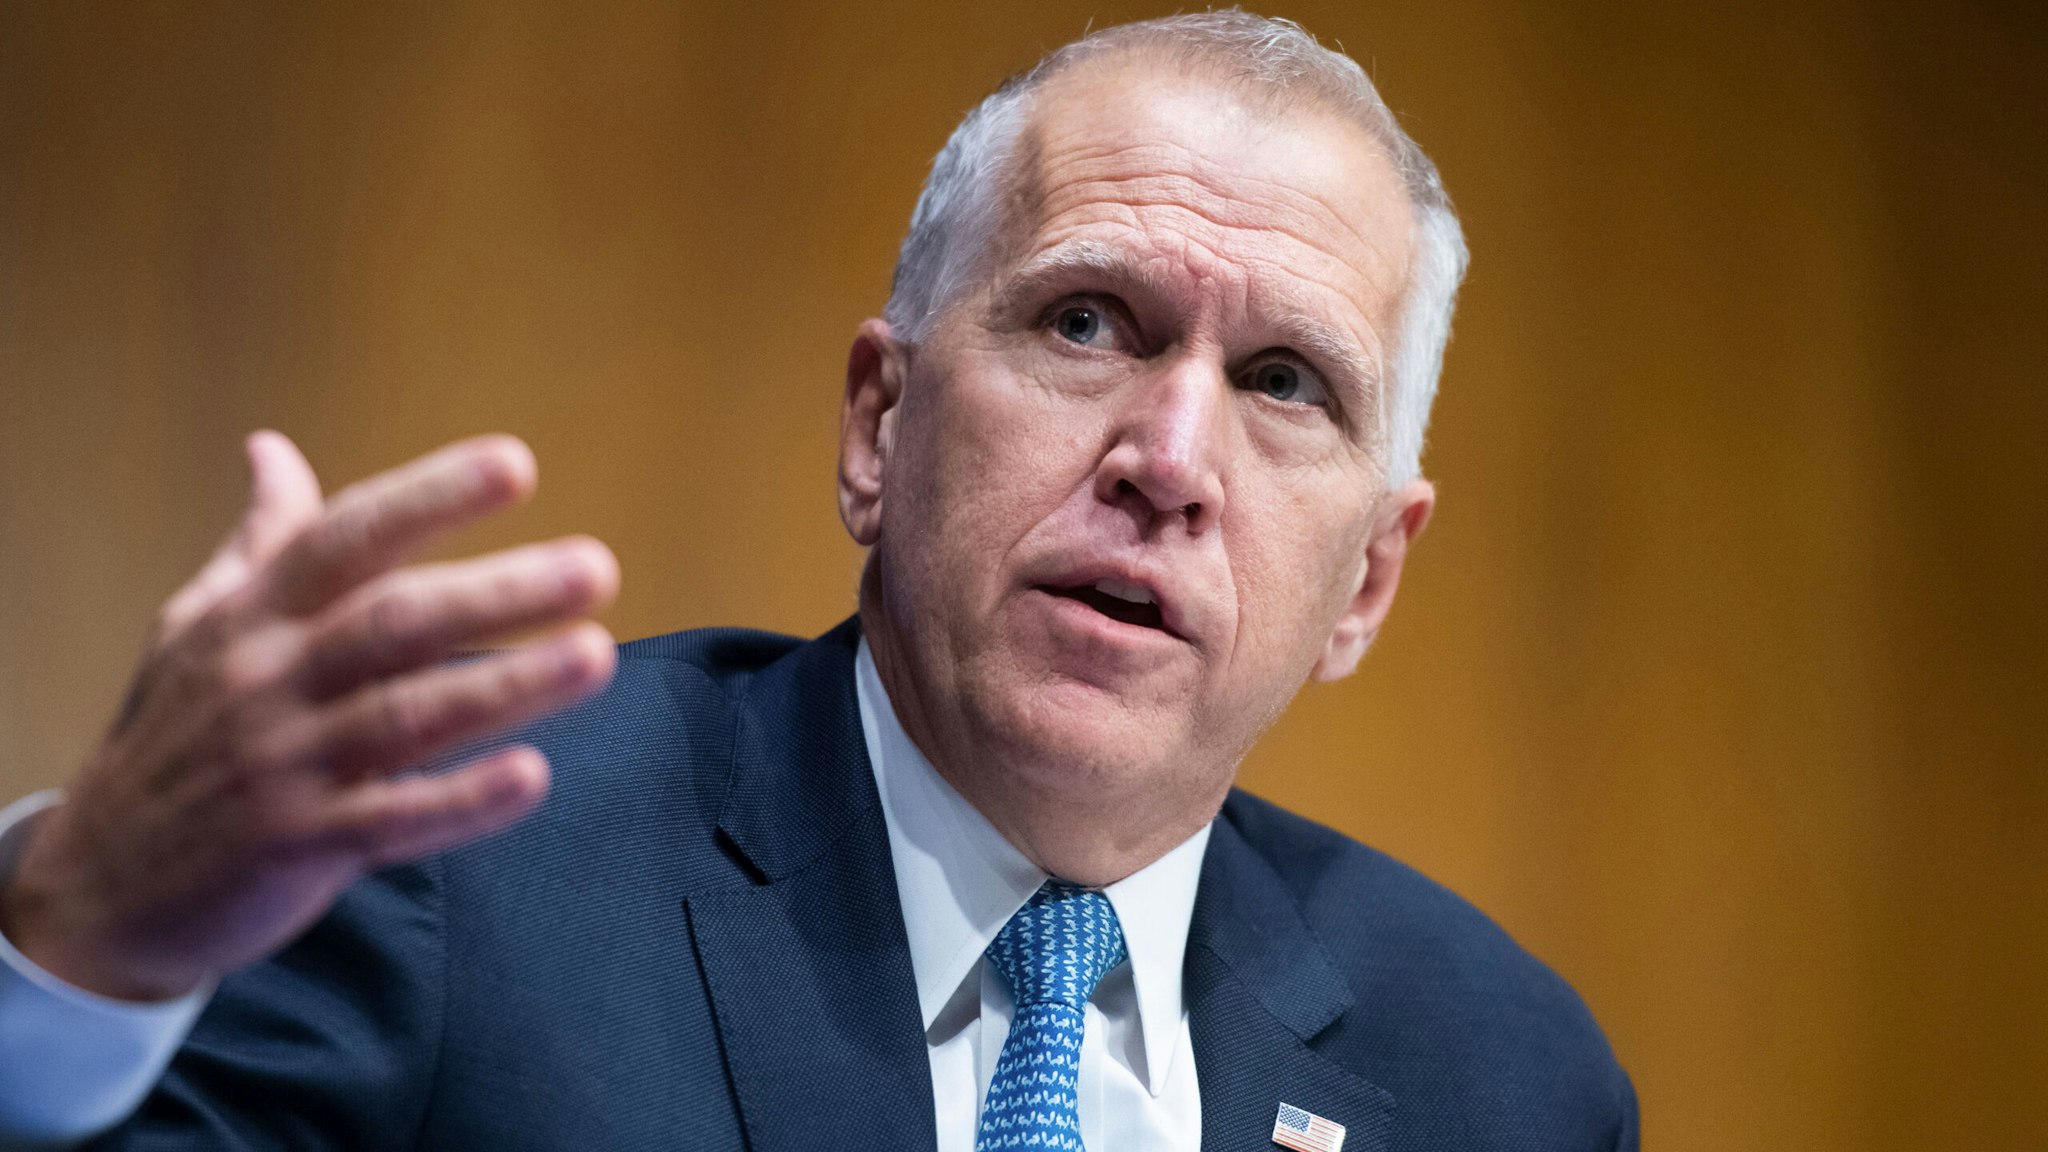 UNITED STATES - JUNE 16: Sen. Thom Tillis, R-N.C., asks a question during the Senate Judiciary Committee hearing titled ÒPolice Use of Force and Community Relations,Ó in Dirksen Senate Office Building in Washington, D.C., on Tuesday, June 16, 2020.